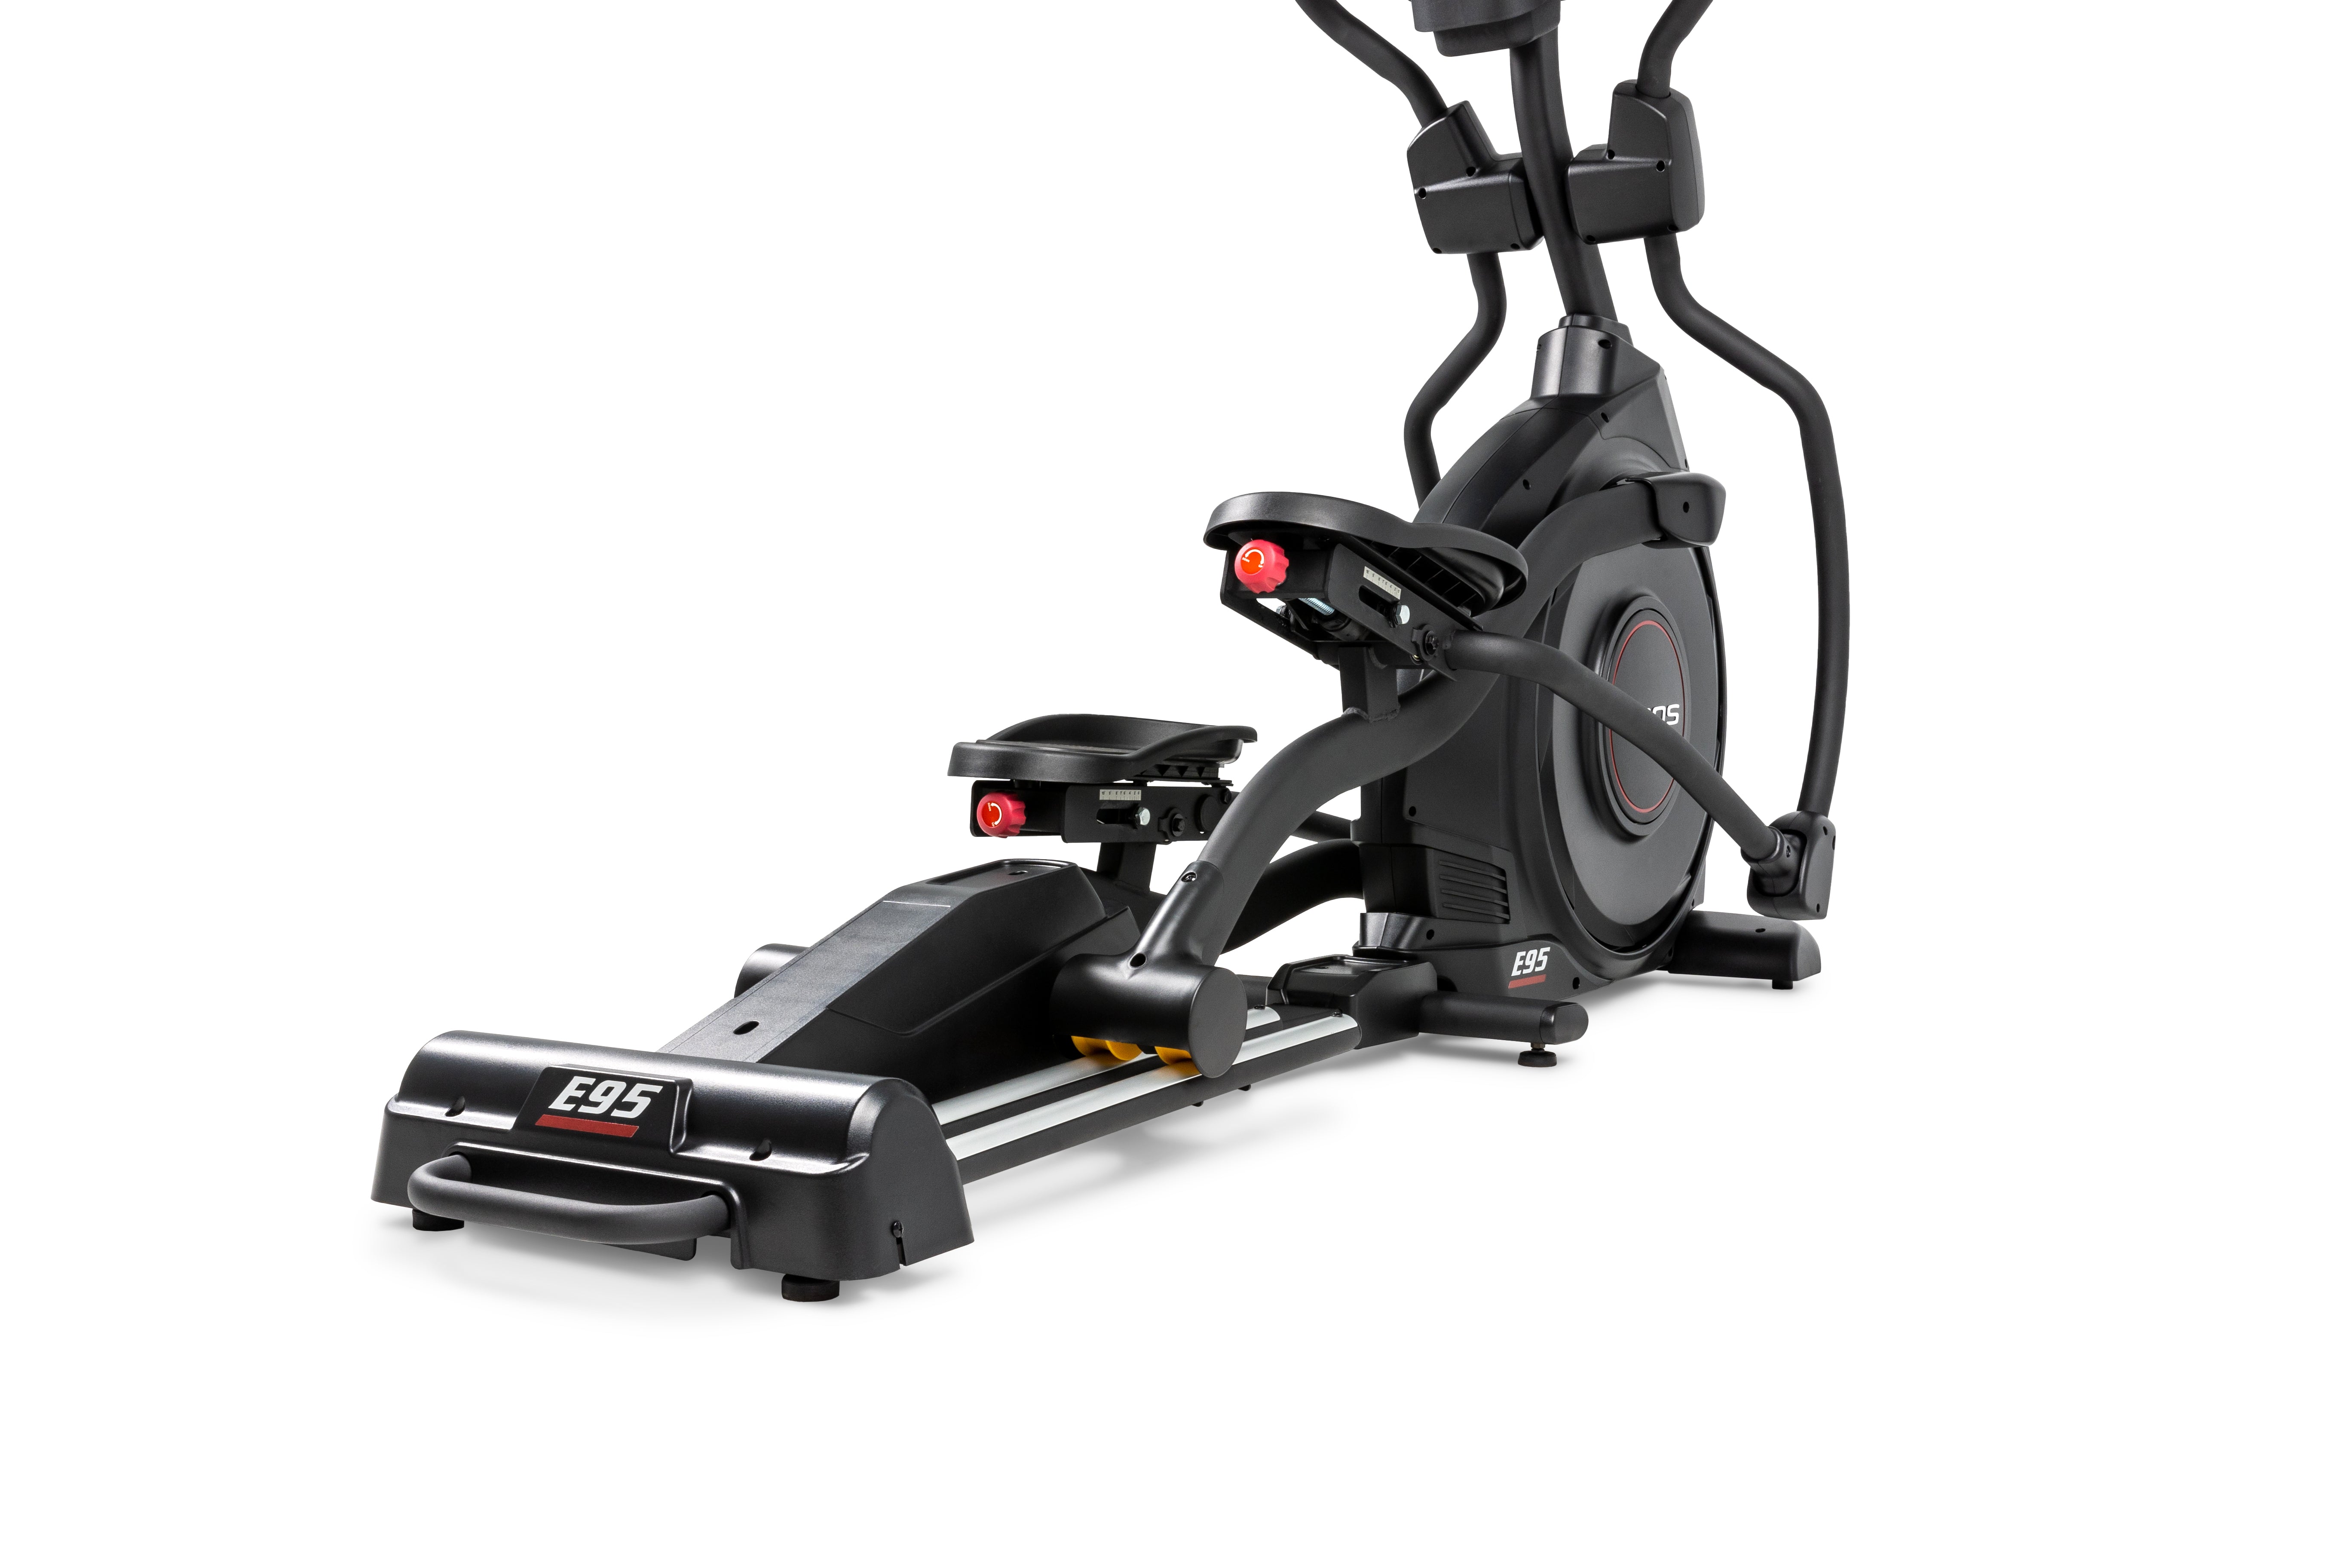 Full side view of the Sole E95 elliptical machine, showcasing its black frame, handlebars, foot pedals, and control panel, with prominent 'E95' branding on the base.